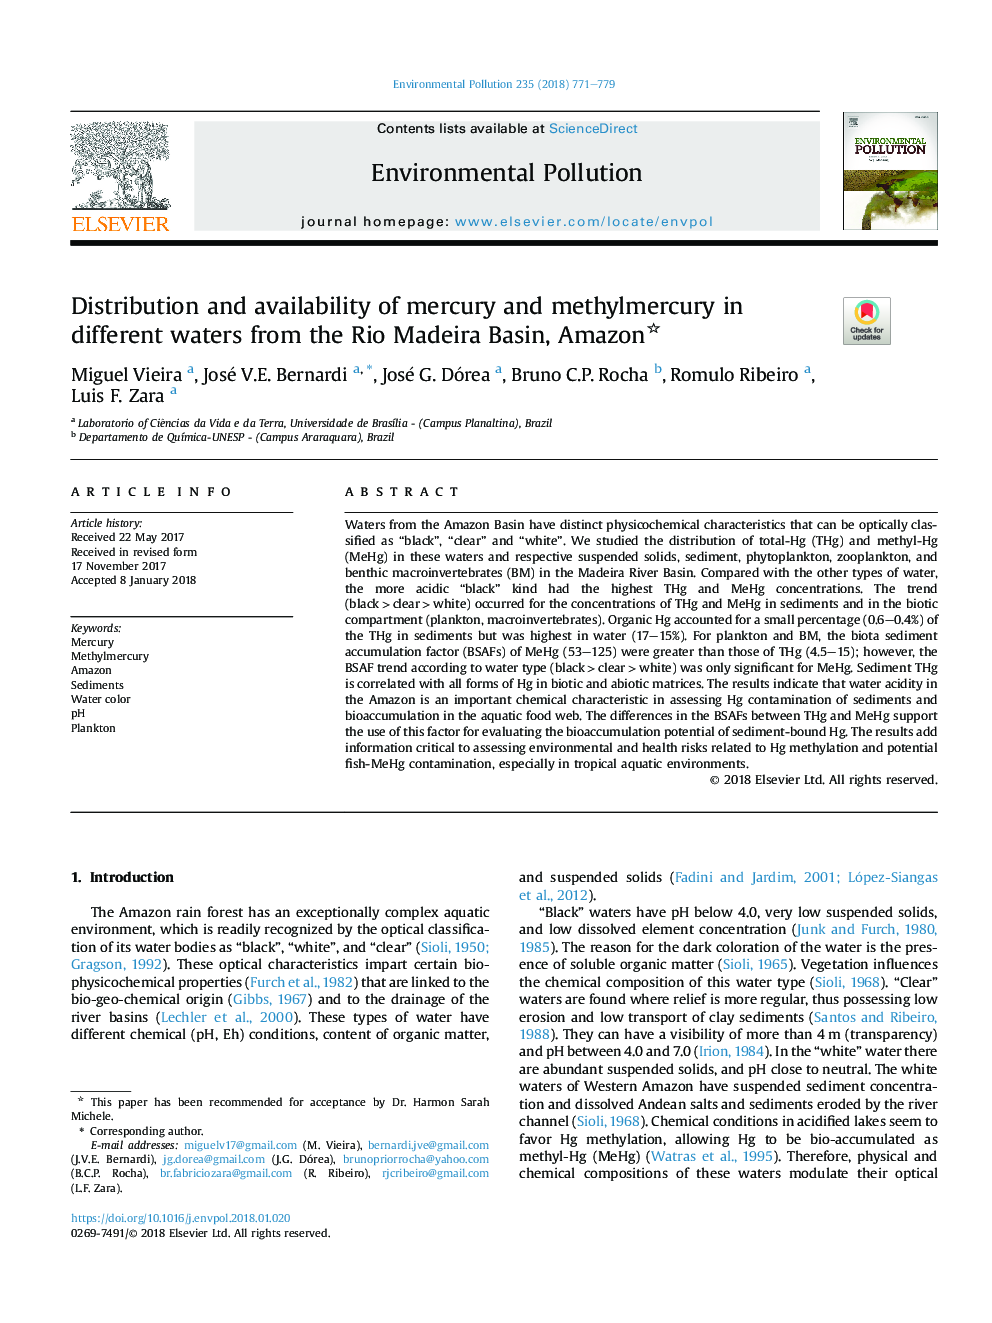 Distribution and availability of mercury and methylmercury in different waters from the Rio Madeira Basin, Amazon